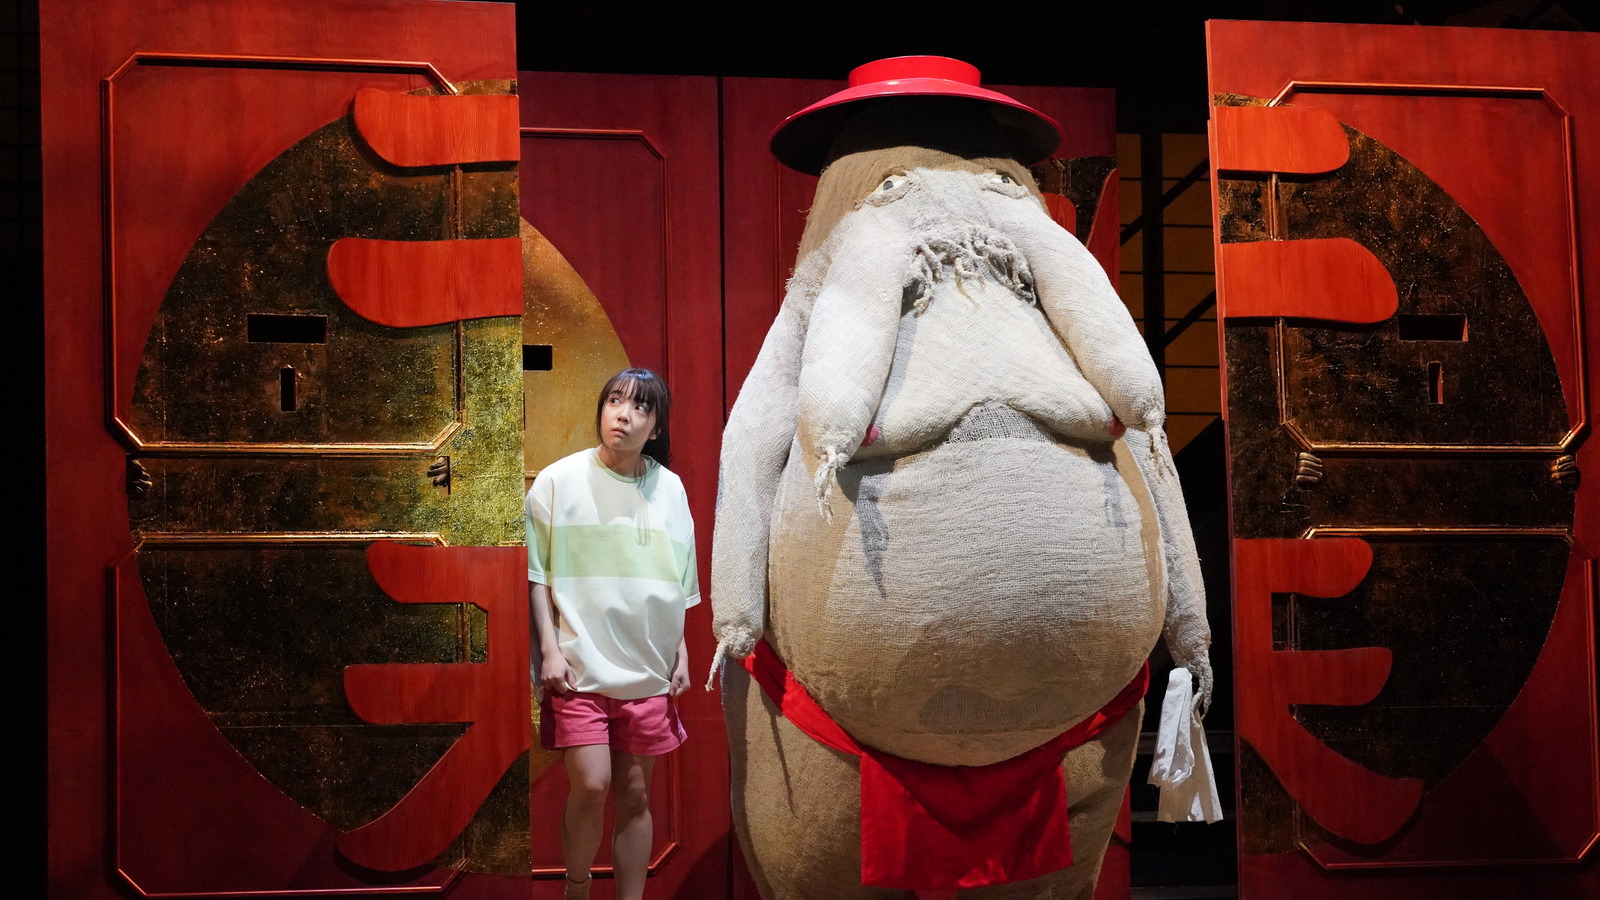 #Spirited Away Is Brought To Life In Delightful Images From New Stage Show